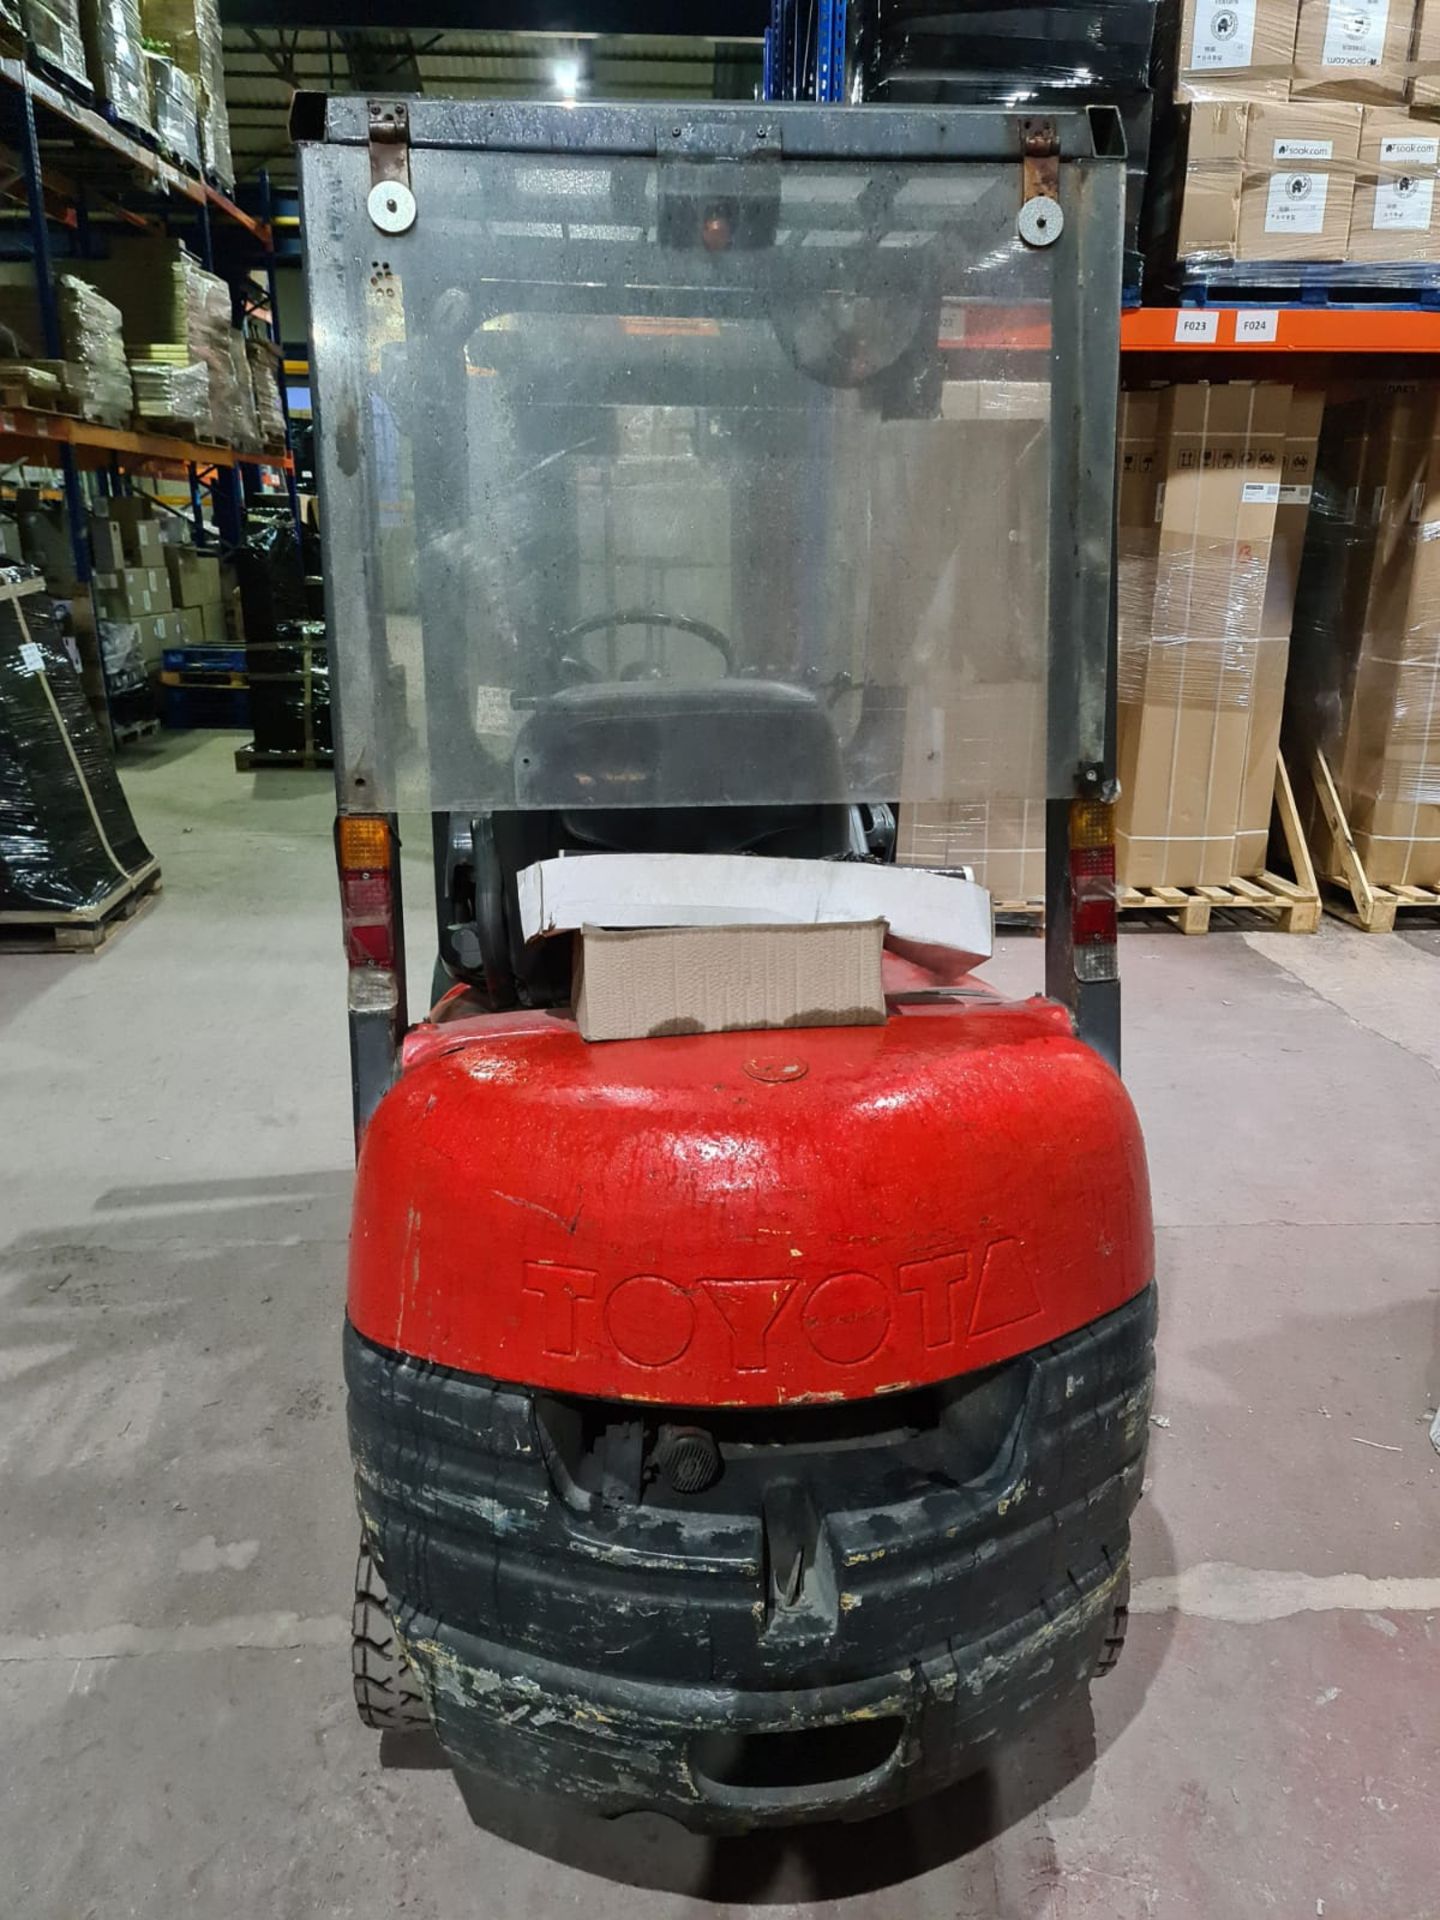 TOYOTA TRIPLE MAST CONTAINER SPEC DIESEL FORK LIFT TRUCK - Image 4 of 6